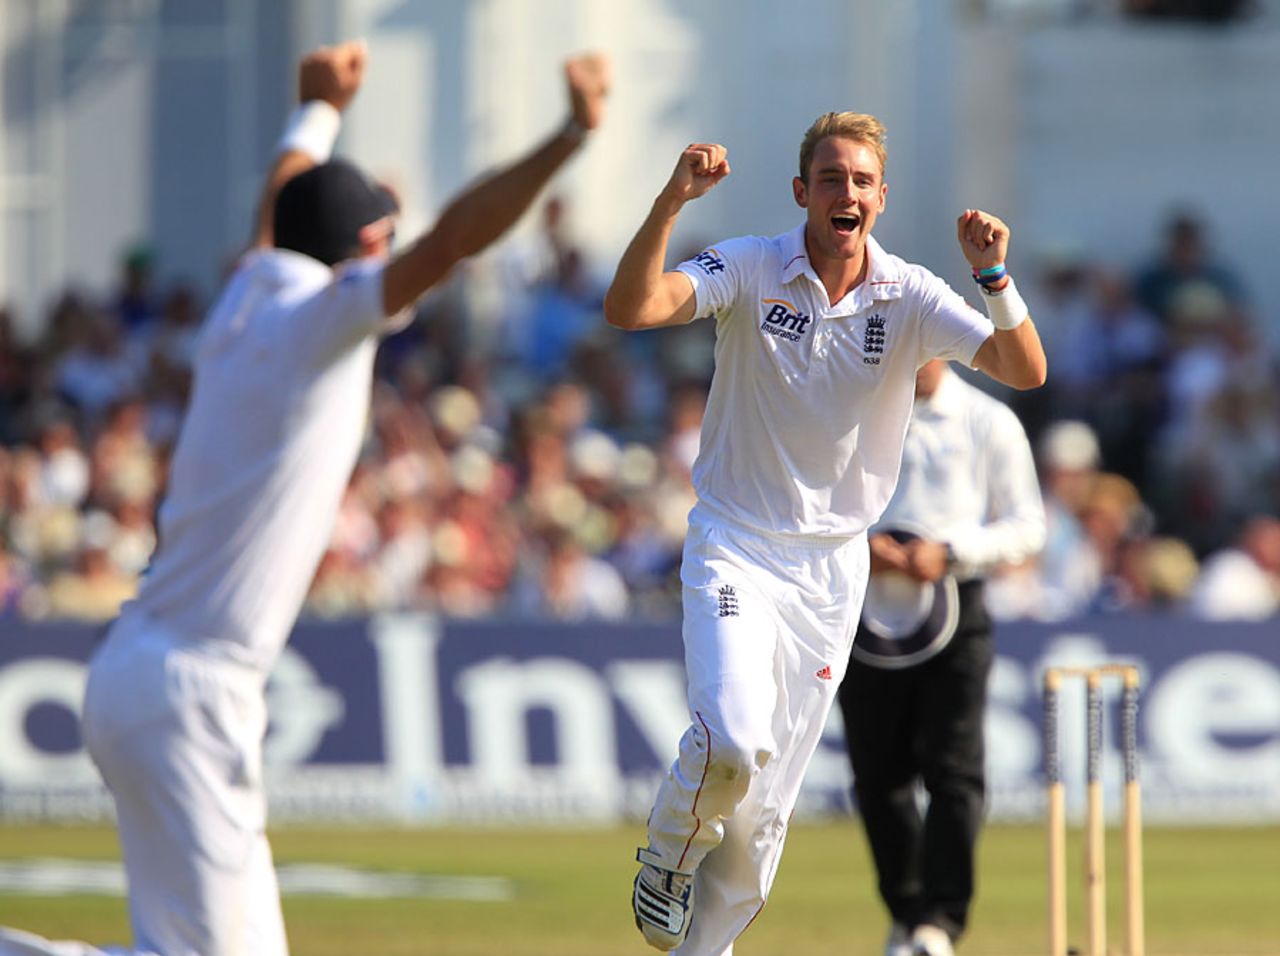 Stuart Broad claimed the key wicket of Shivnarine Chanderpaul, England v West Indies, 2nd Test, Trent Bridge, 3rd day, May 27, 2012